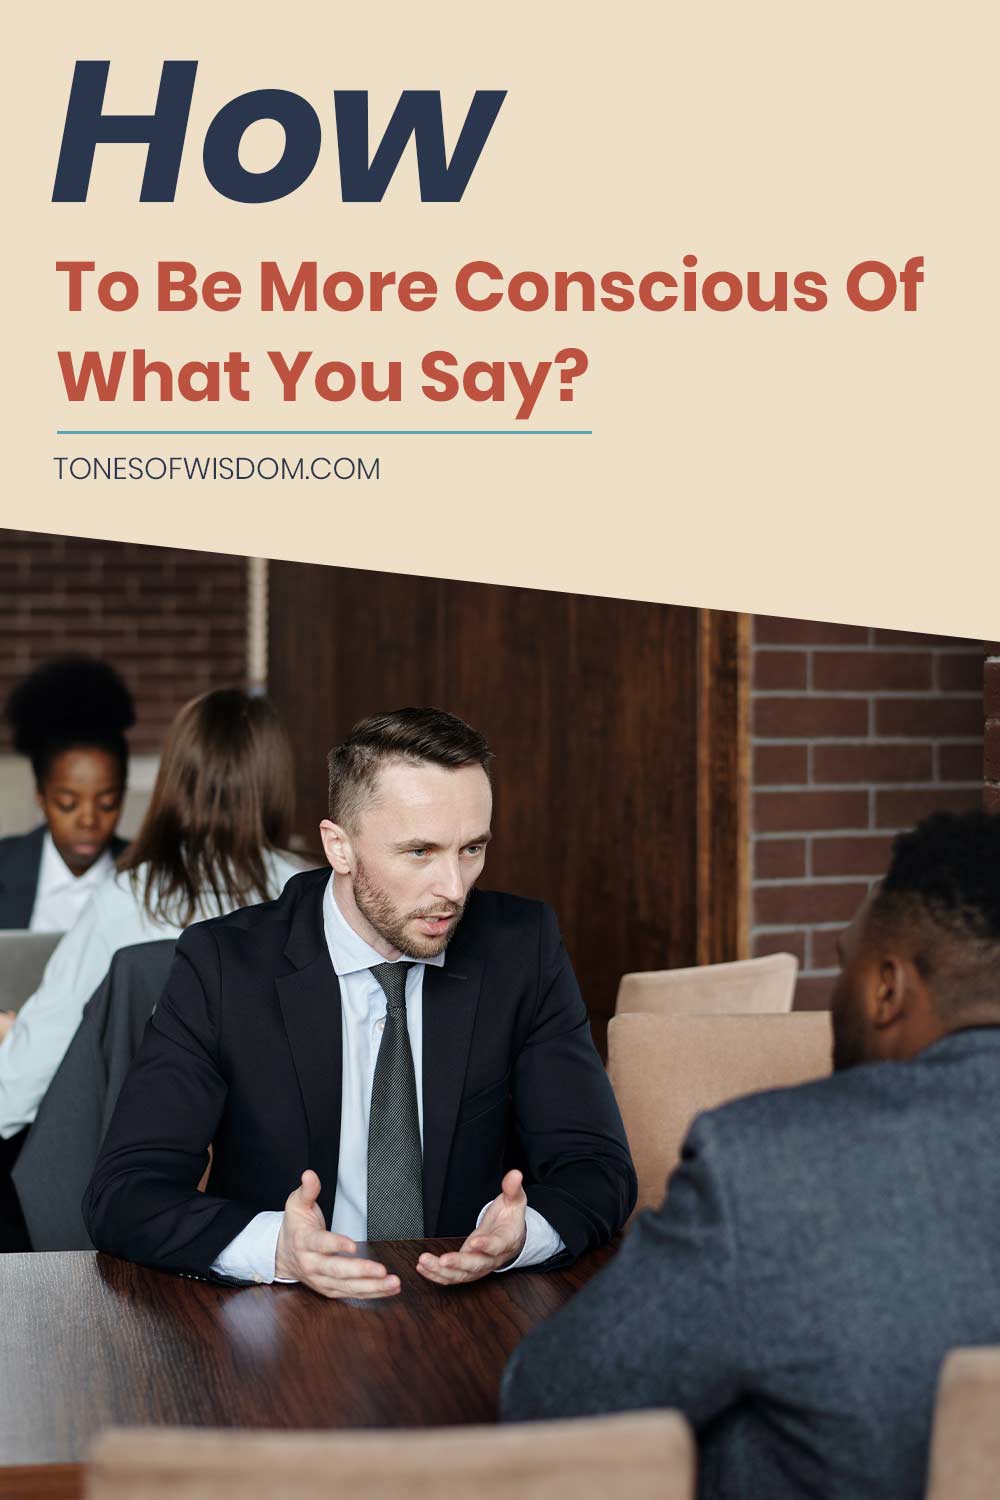 How To Be More Conscious Of What You Say?